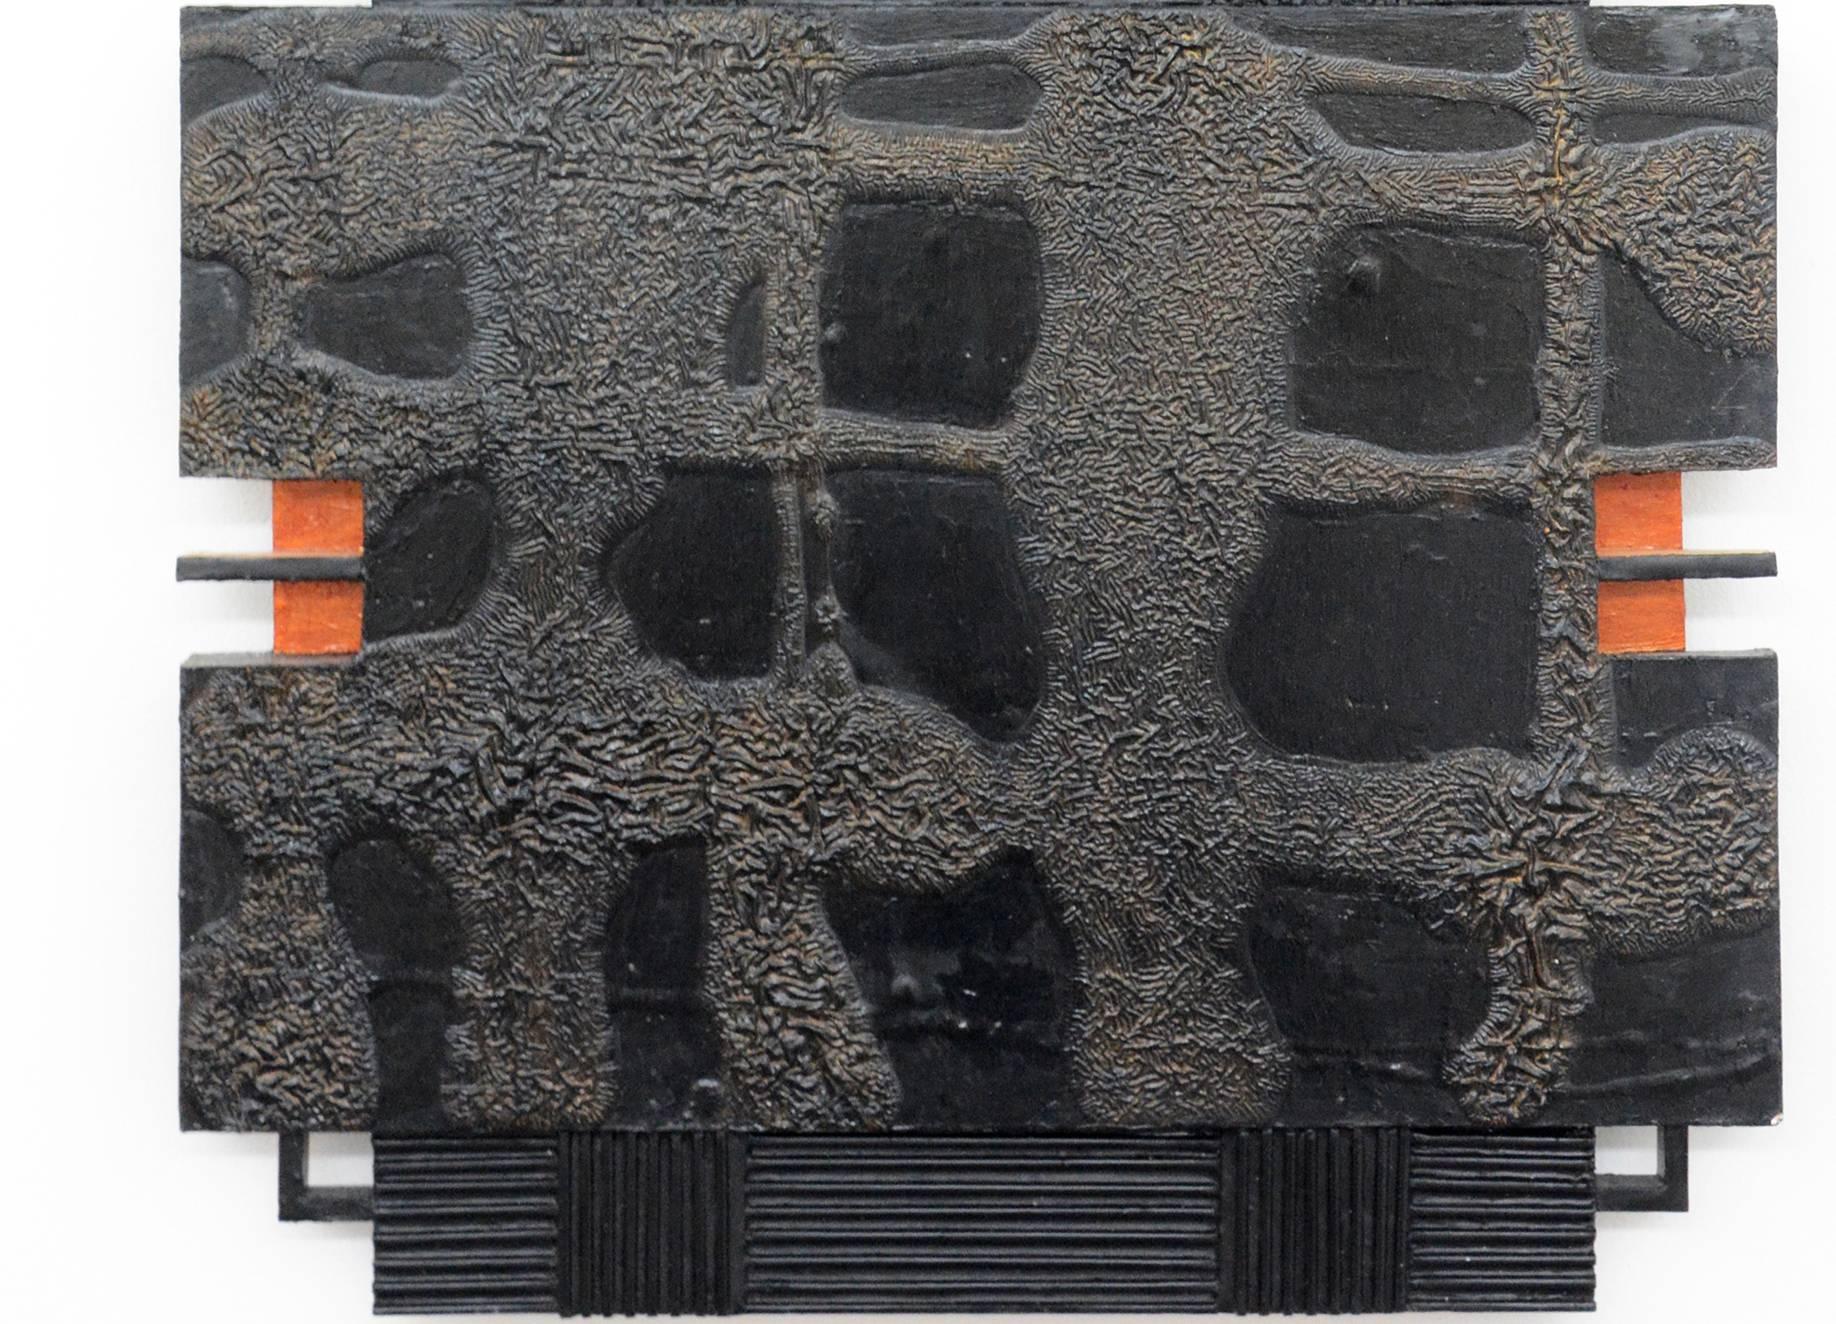 Two textured, brown and black patinated, wood sections each with two orange cutouts intersect with a ribbed black vertical in this 30 inches tall wall relief.  

